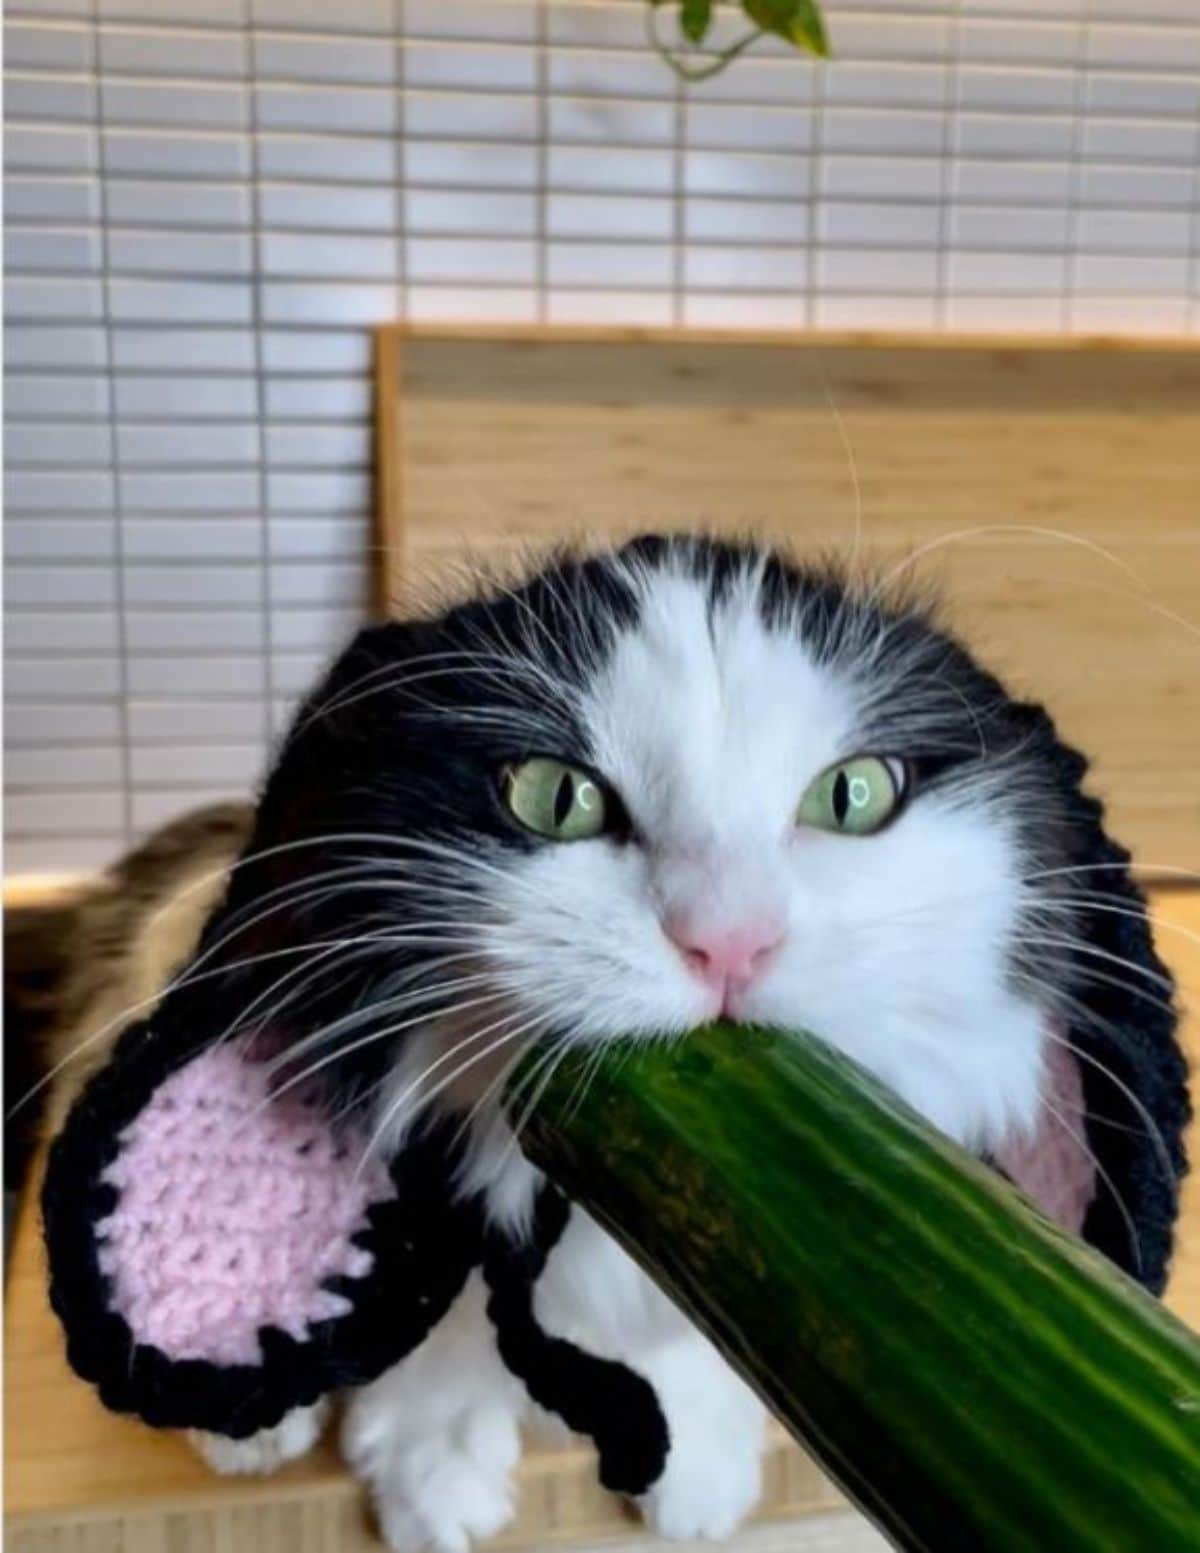 black and white fluffy cat wearing black and pink bunny ears eating a cucumber someone is holding out